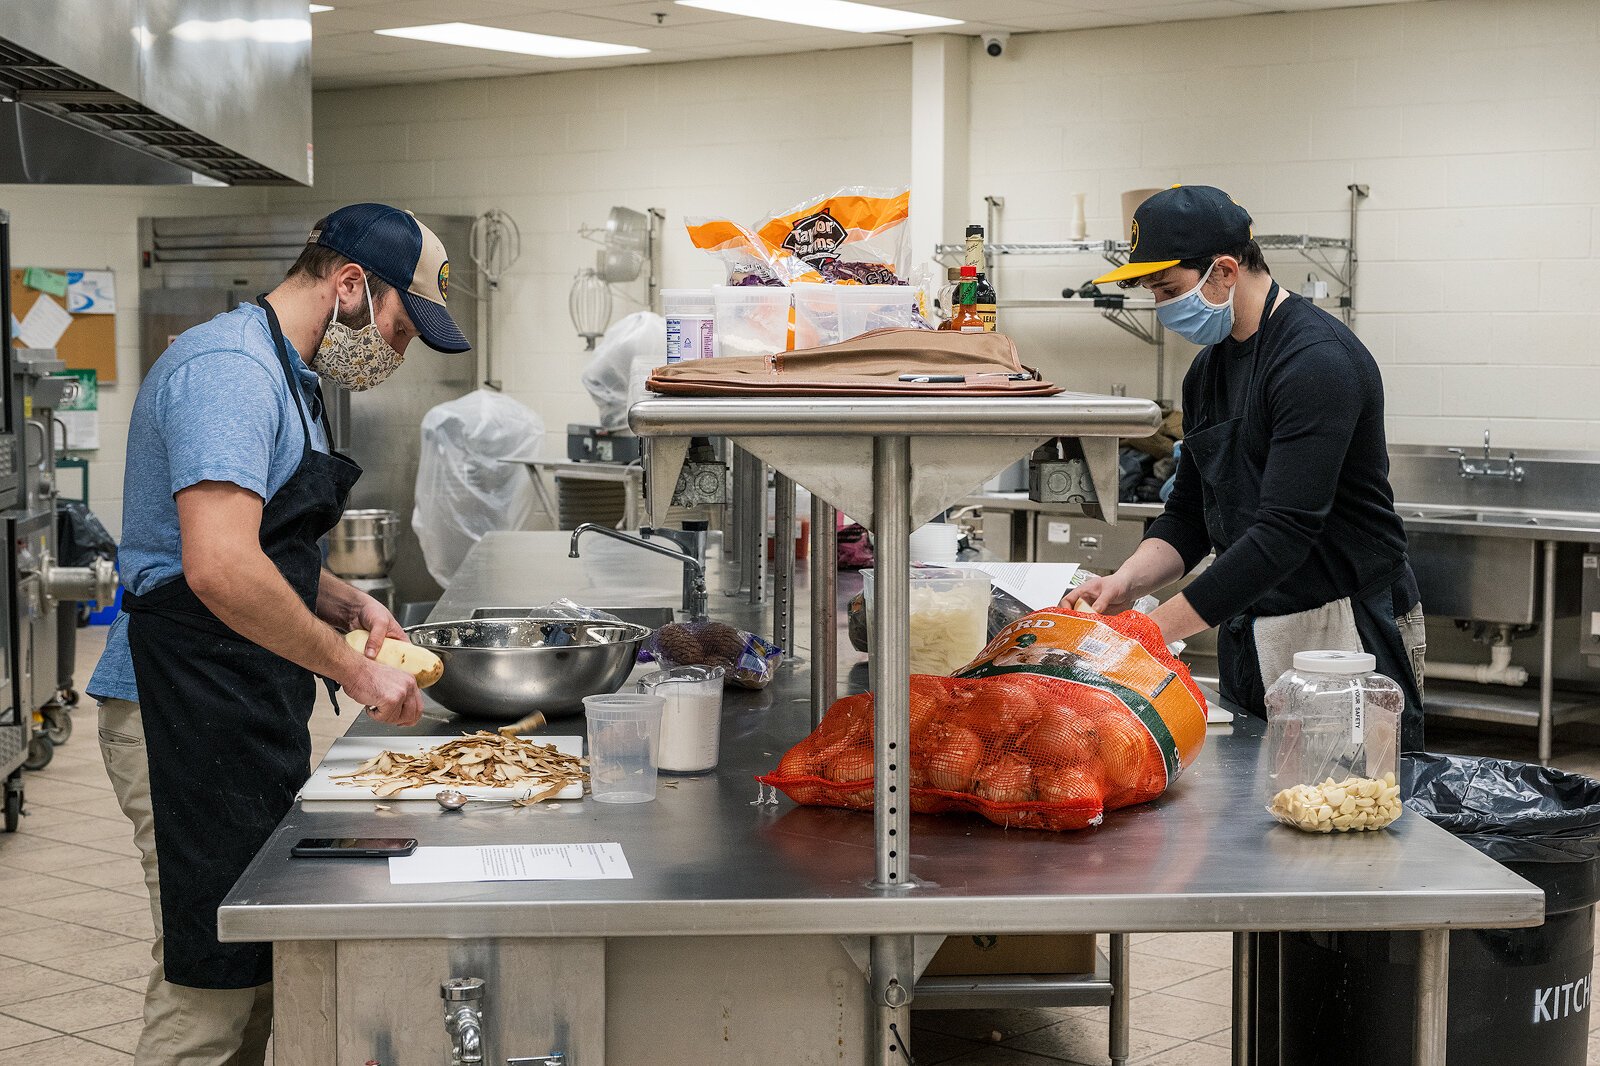 Forrest Maddox and Bryan Santos, owners of the White Pine Kitchen, prepare food.